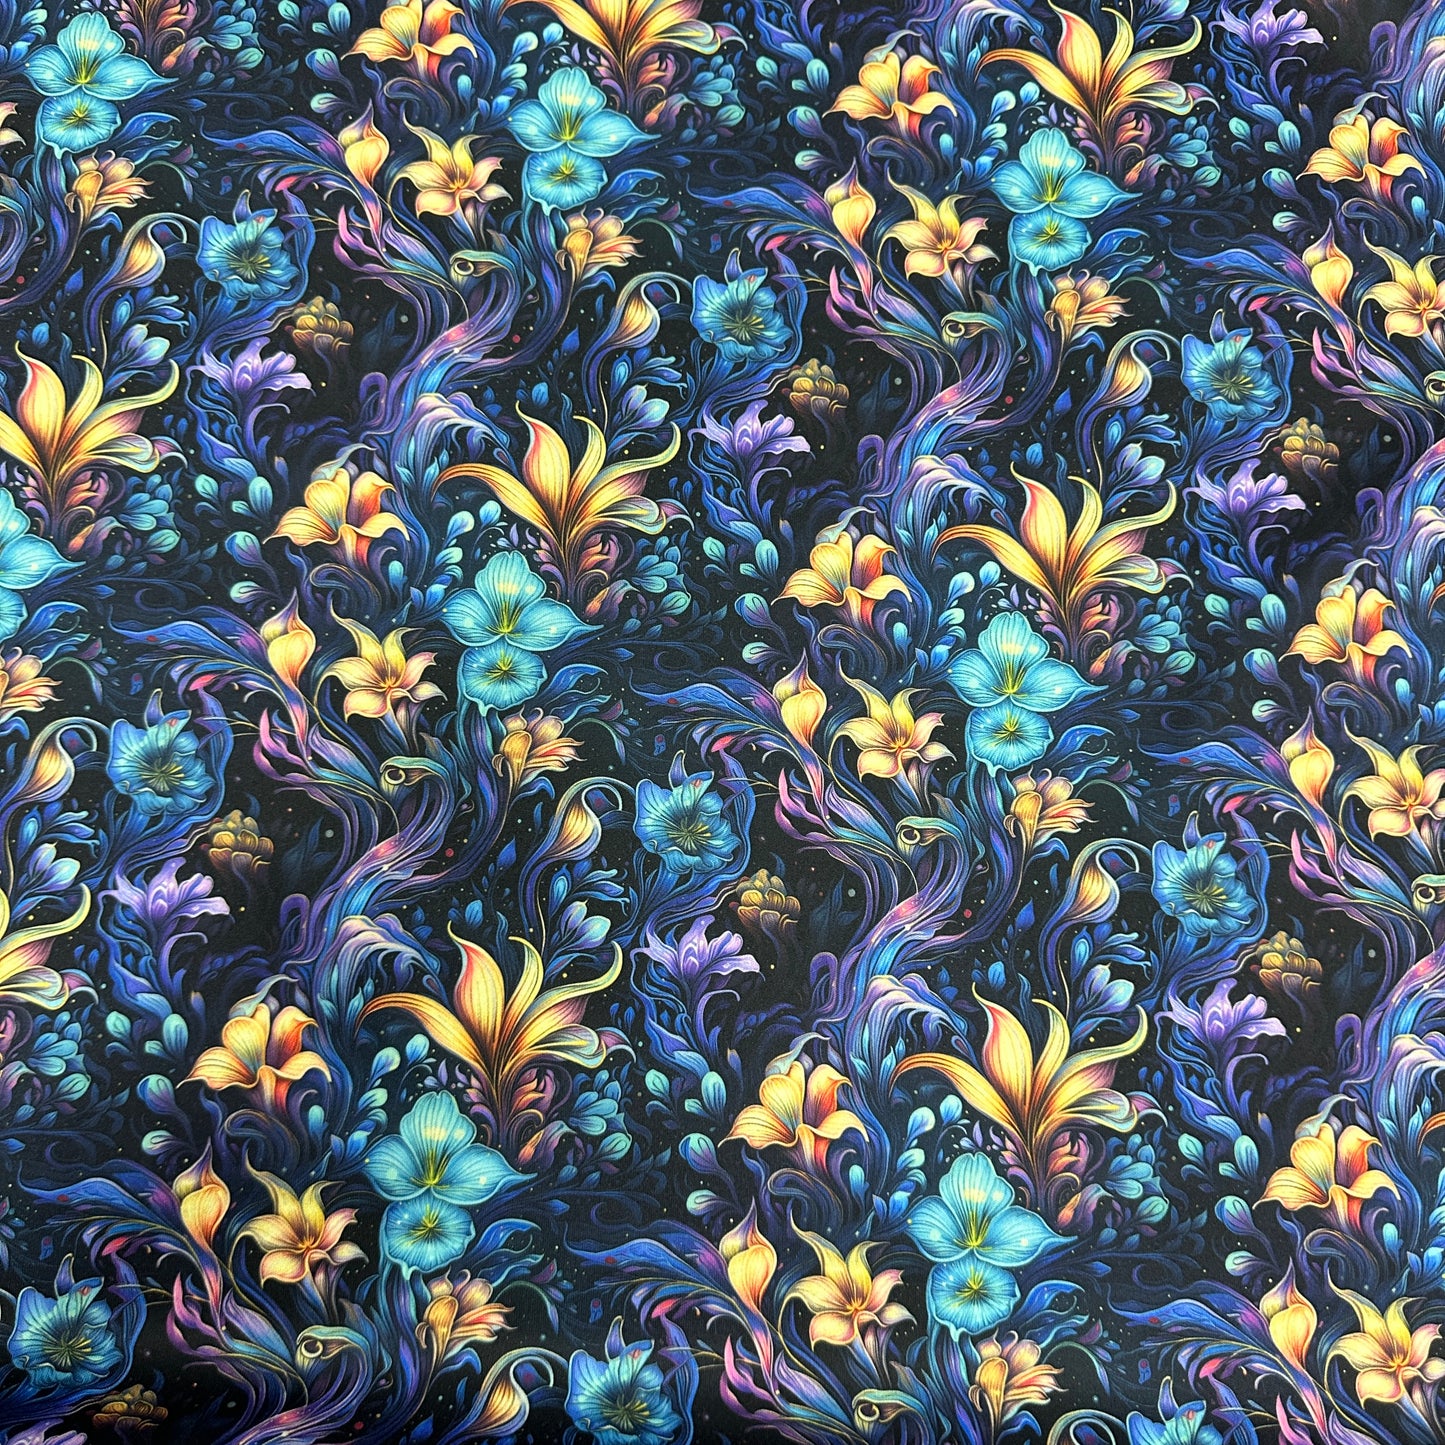 Vivid Floral Bioluminescence 1 mil PUL Fabric - Made in the USA